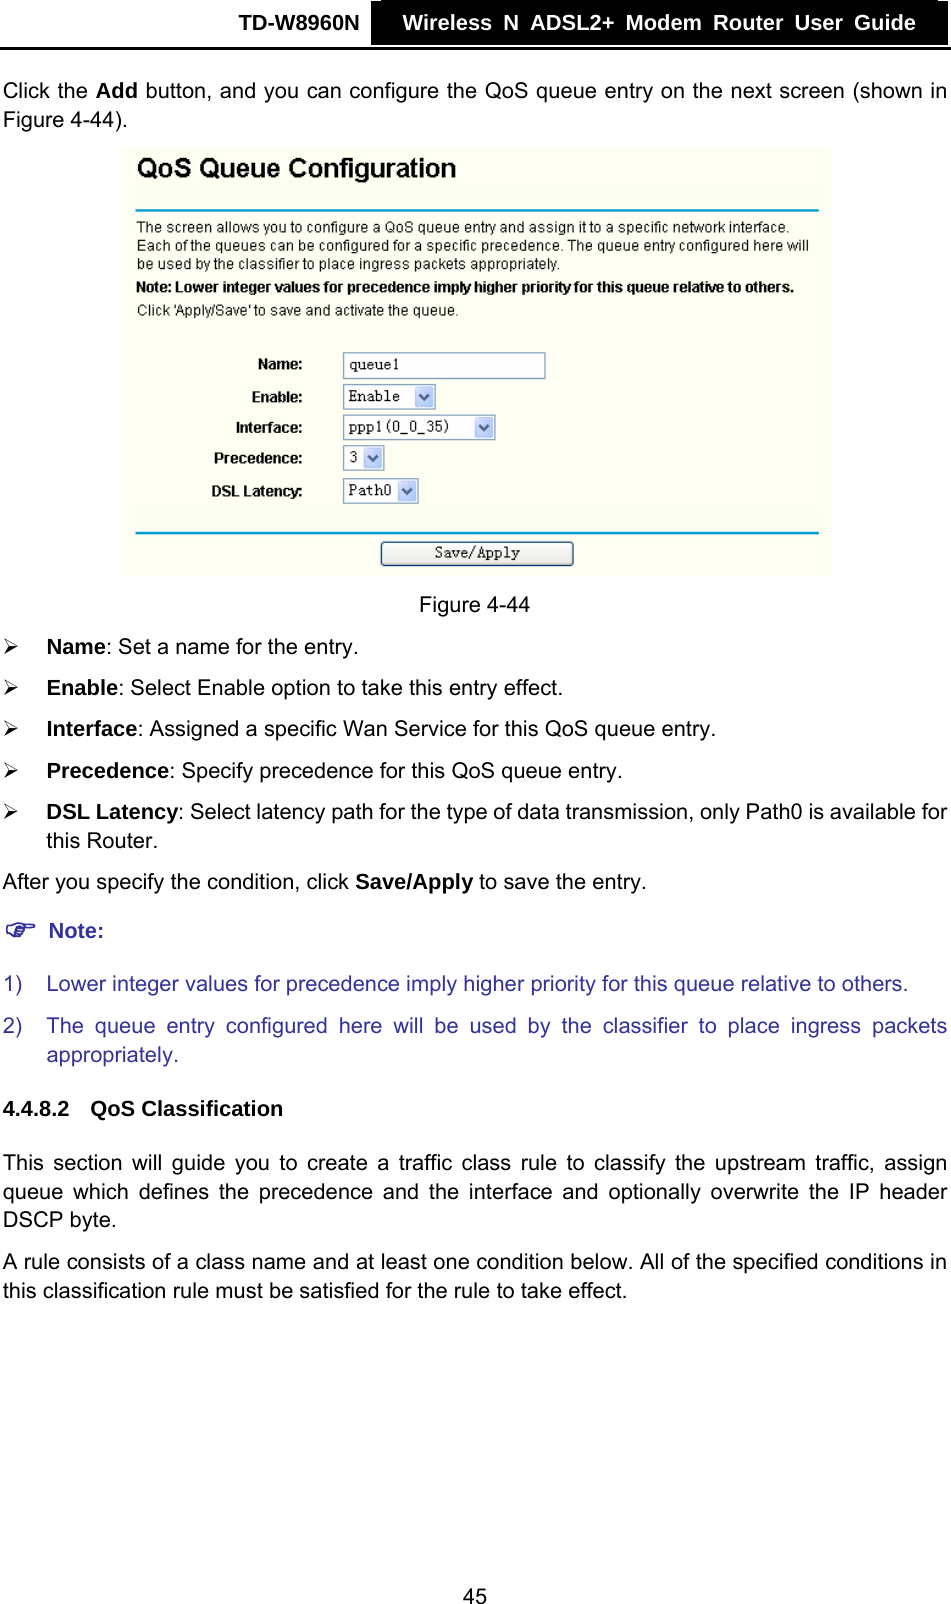 TD-W8960N    Wireless N ADSL2+ Modem Router User Guide    Click the Add button, and you can configure the QoS queue entry on the next screen (shown in Figure 4-44).  Figure 4-44 ¾ Name: Set a name for the entry. ¾ Enable: Select Enable option to take this entry effect. ¾ Interface: Assigned a specific Wan Service for this QoS queue entry. ¾ Precedence: Specify precedence for this QoS queue entry. ¾ DSL Latency: Select latency path for the type of data transmission, only Path0 is available for this Router. After you specify the condition, click Save/Apply to save the entry. ) Note: 1)  Lower integer values for precedence imply higher priority for this queue relative to others. 2)  The queue entry configured here will be used by the classifier to place ingress packets appropriately. 4.4.8.2  QoS Classification This section will guide you to create a traffic class rule to classify the upstream traffic, assign queue which defines the precedence and the interface and optionally overwrite the IP header DSCP byte.   A rule consists of a class name and at least one condition below. All of the specified conditions in this classification rule must be satisfied for the rule to take effect. 45 